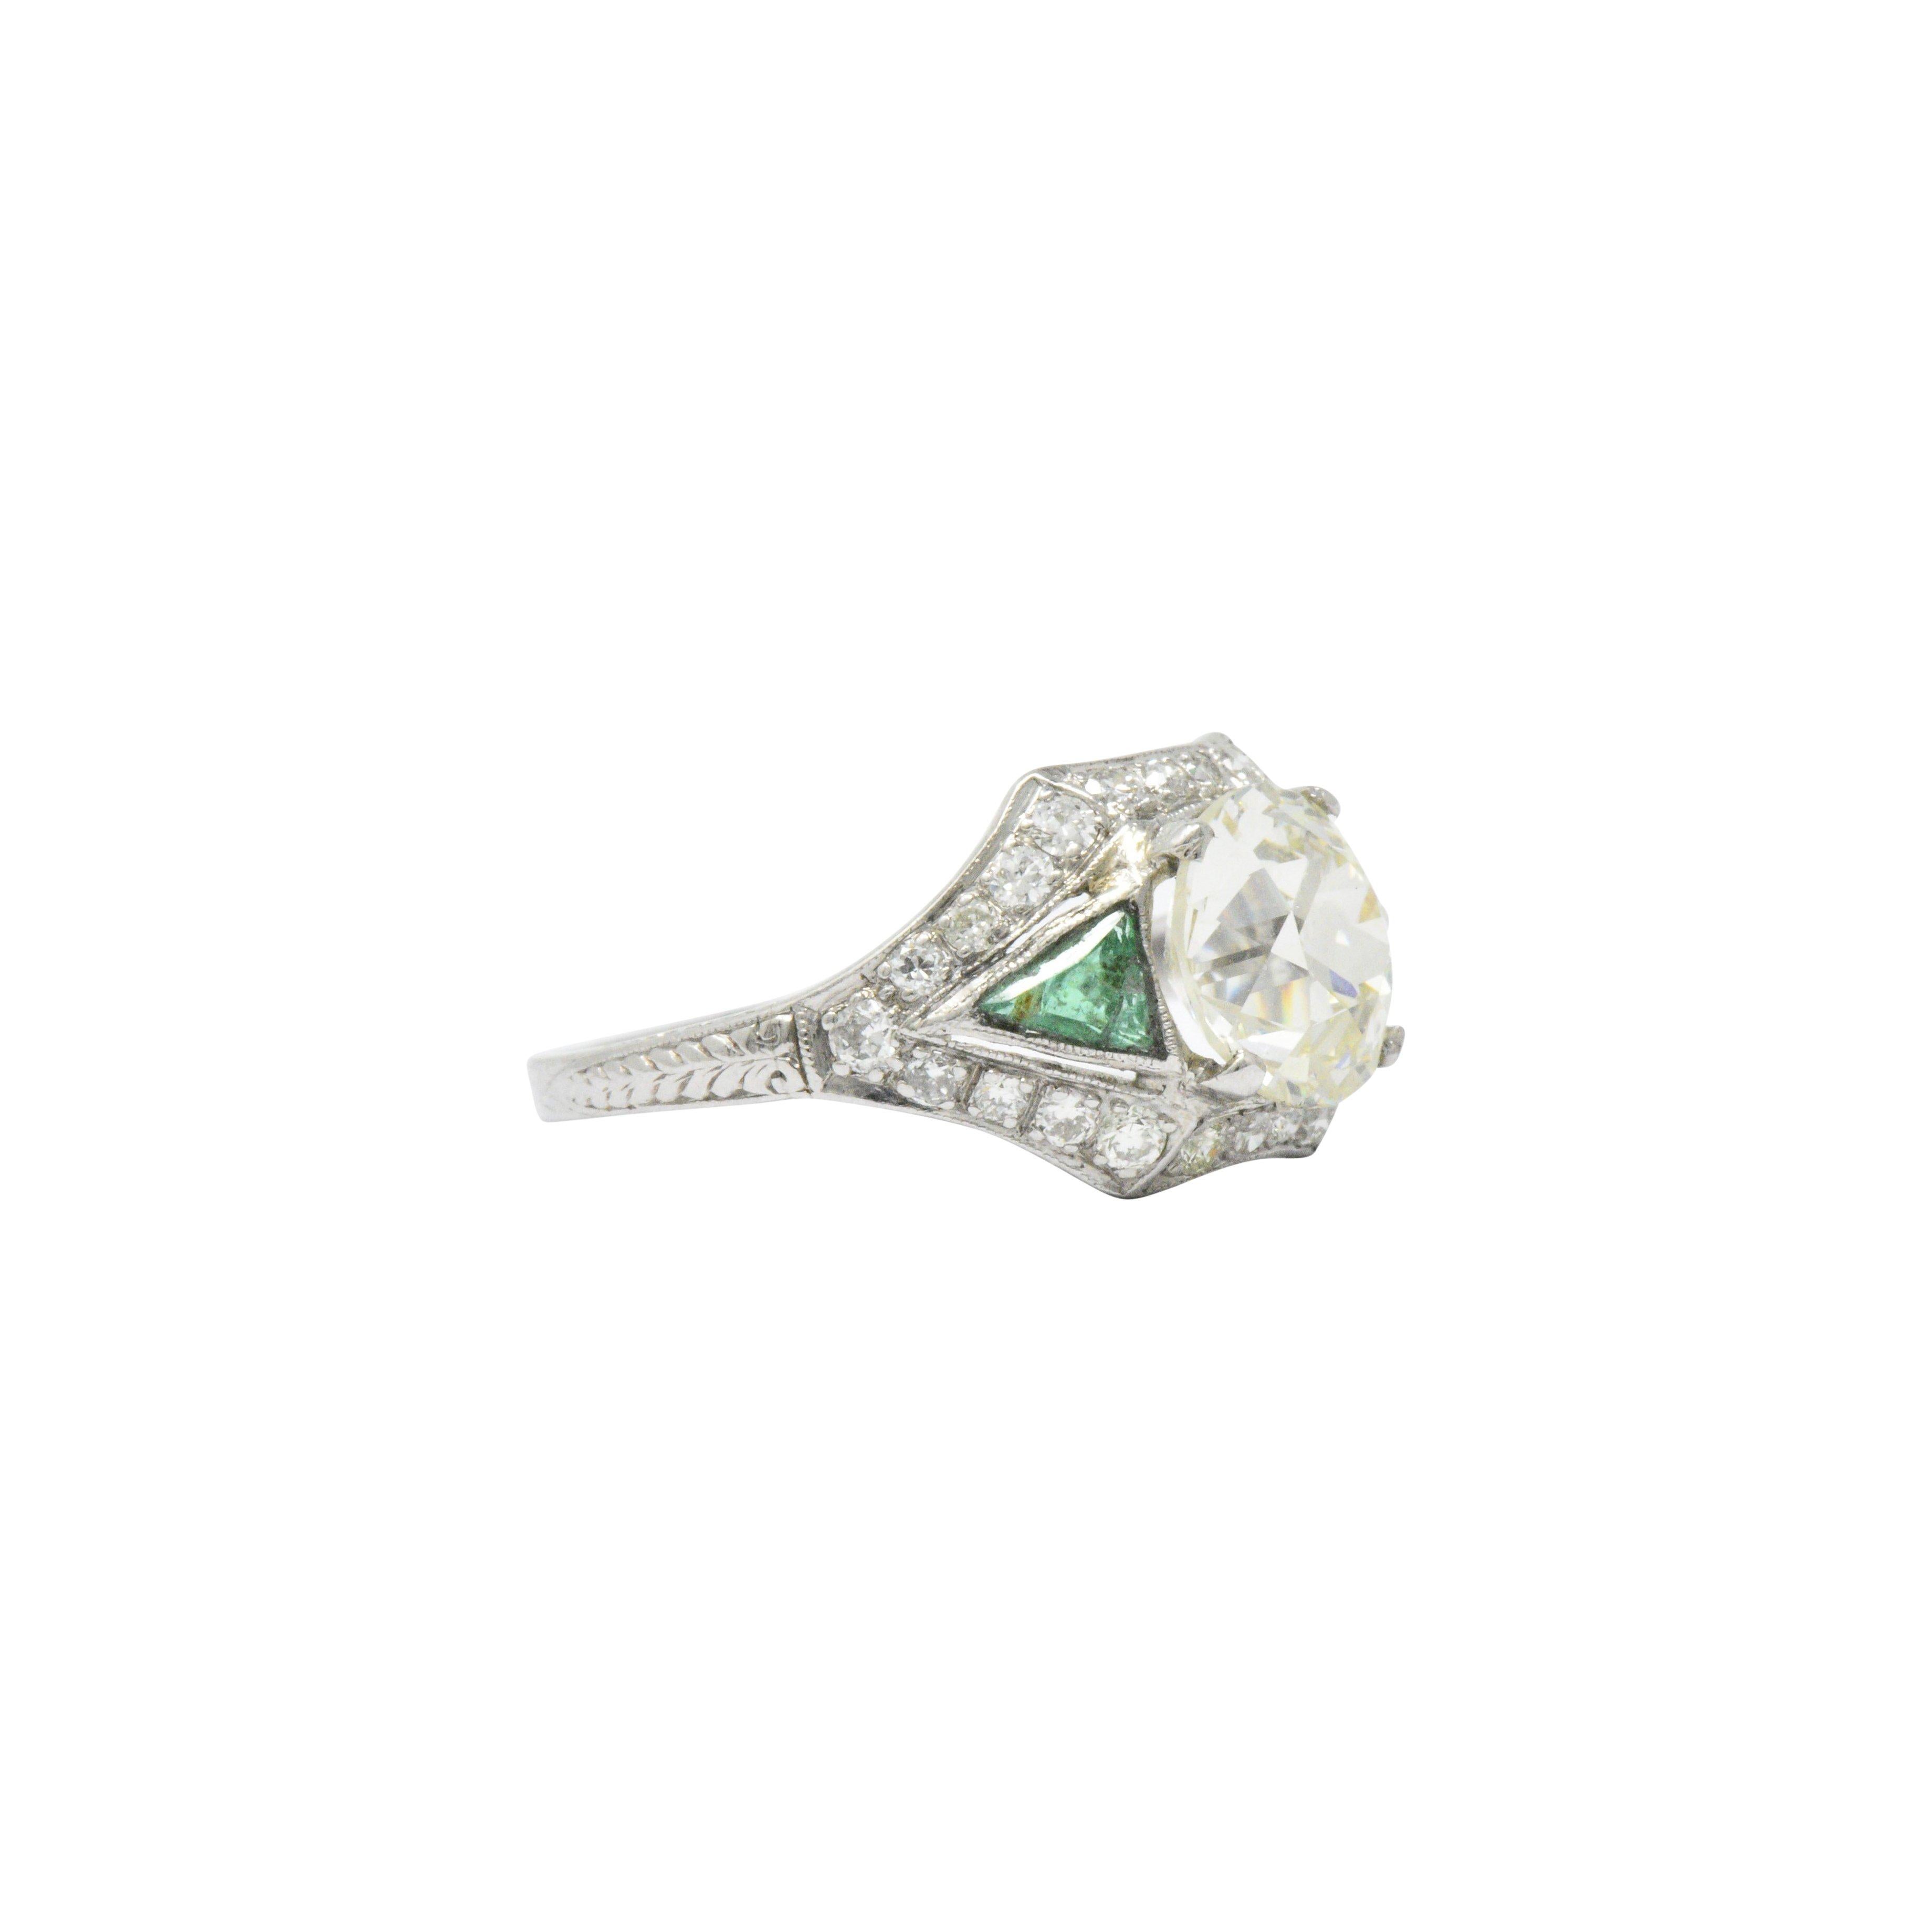 Centering an old European cut diamond weighing 2.71 carat, N color and VS1 clarity

Symmetrical setting containing 26 transitional cut diamonds weighing approximately .40 carats total weight

Two triangular faceted natural emerald accents weighing